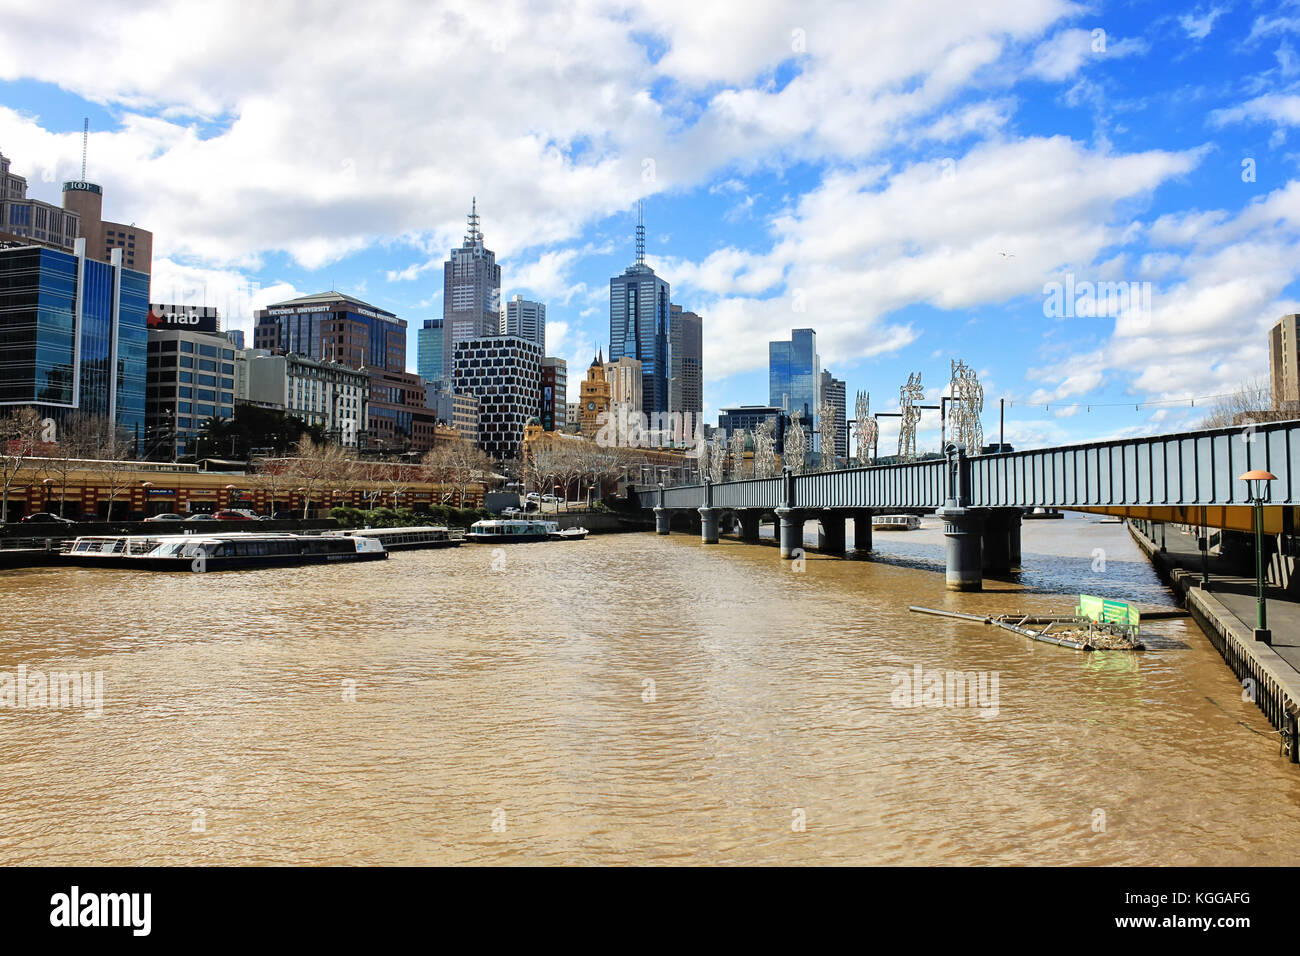 View on a Yarra river and city skyscrapers in Melbourne Stock Photo